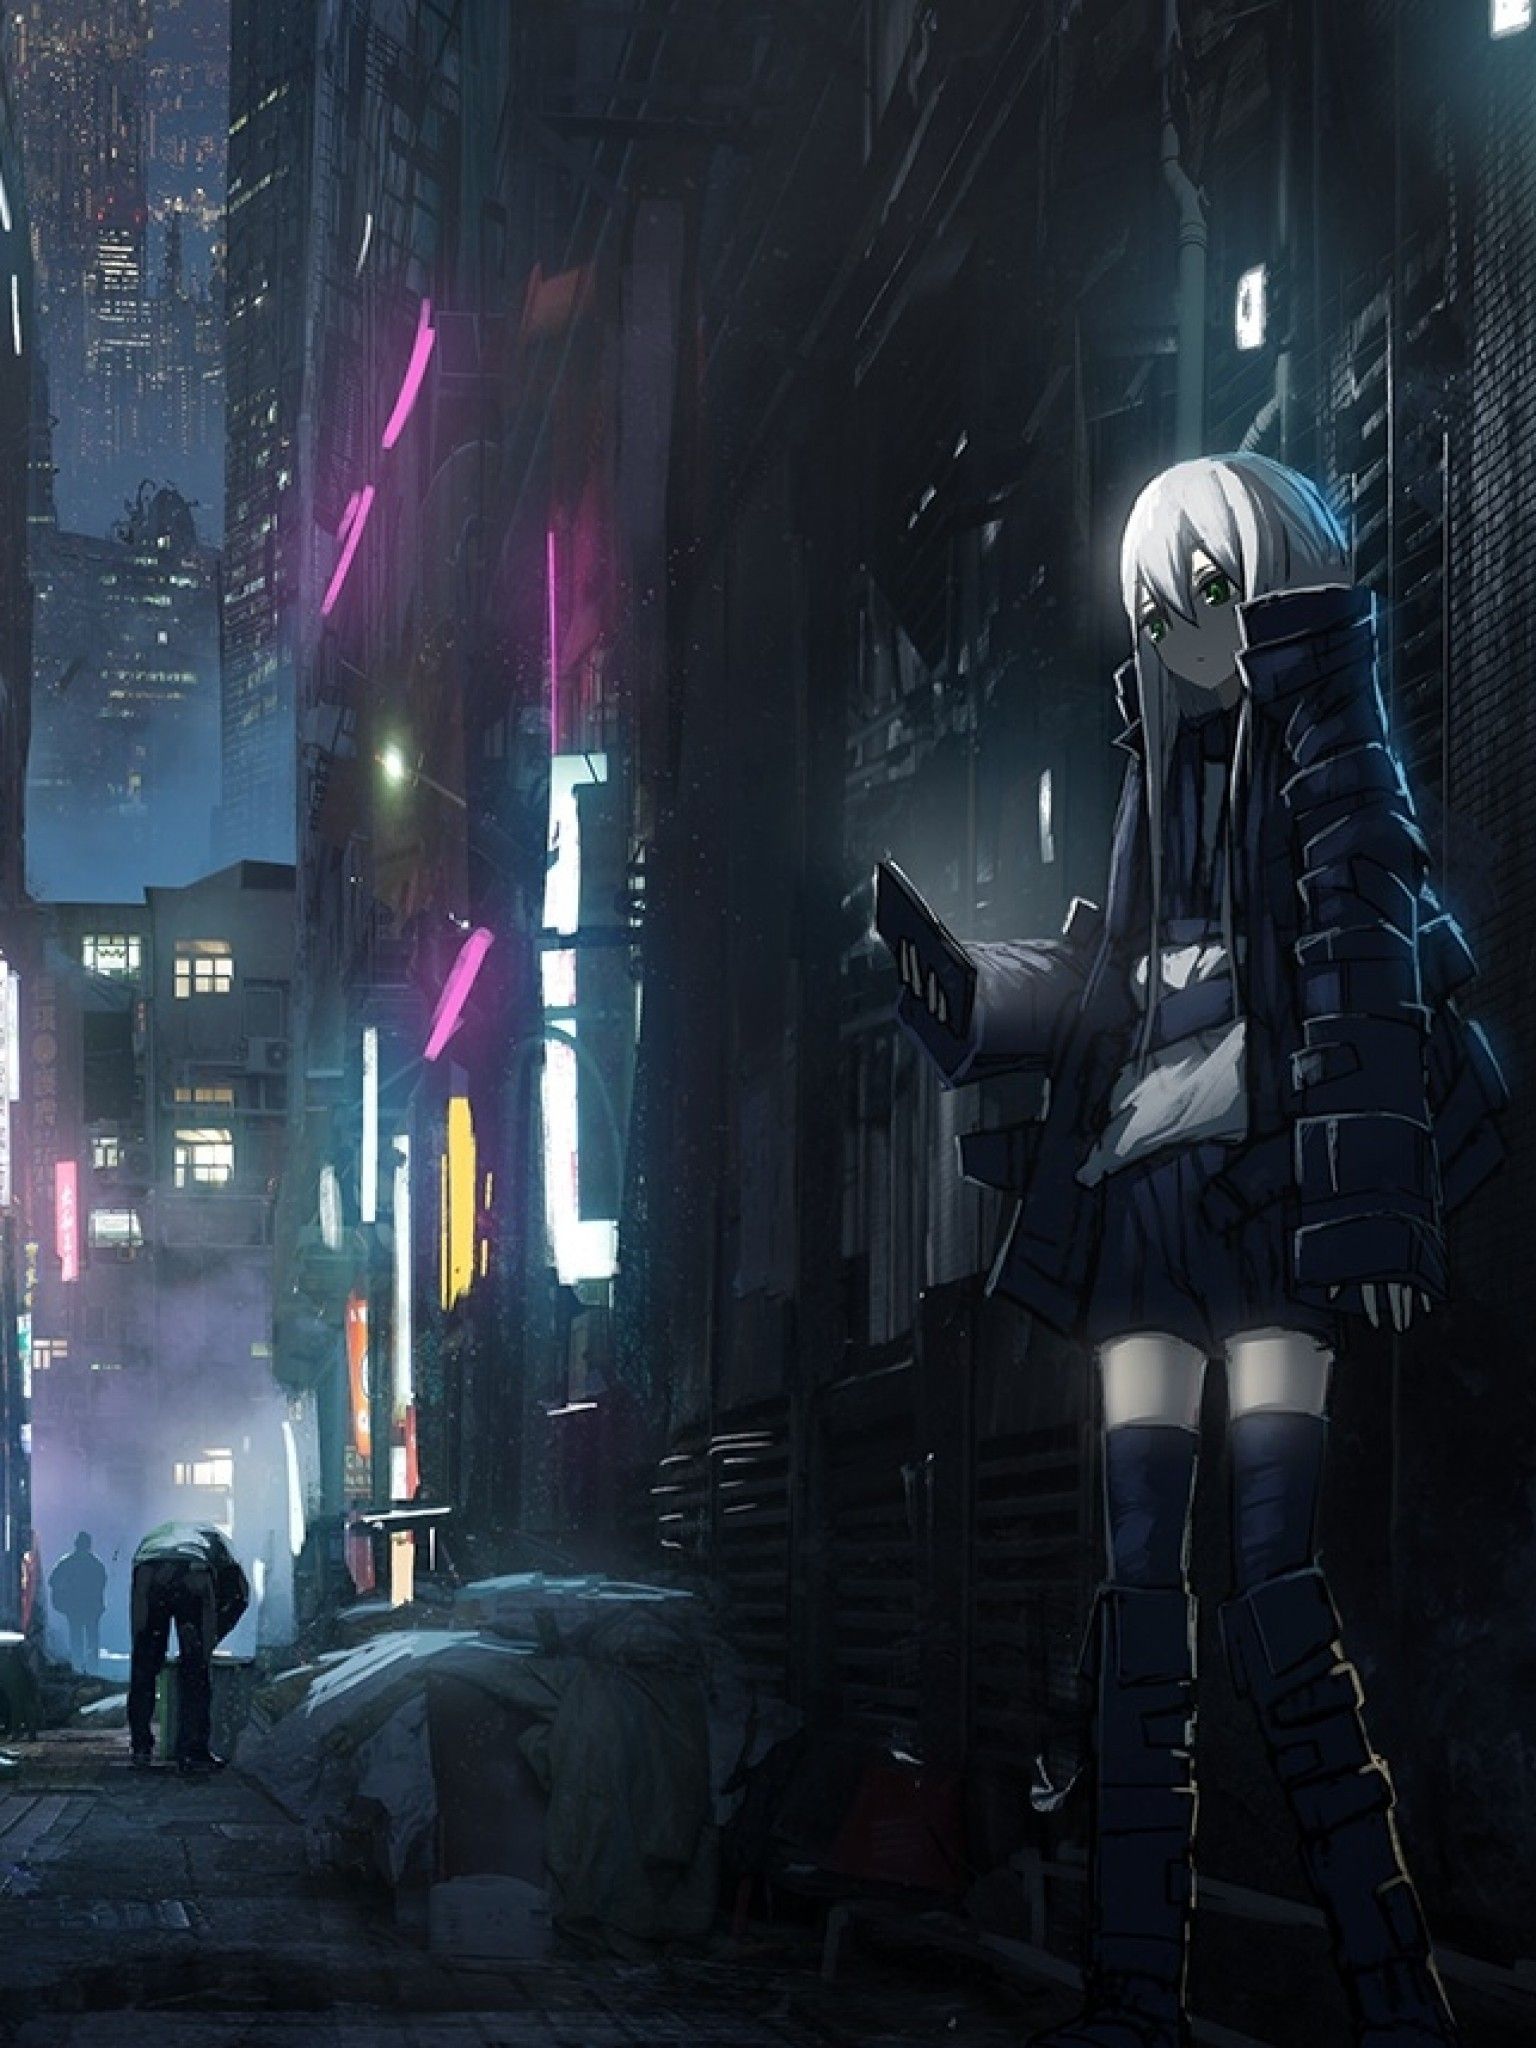 Anime Neon City Wallpapers - Wallpaper Cave